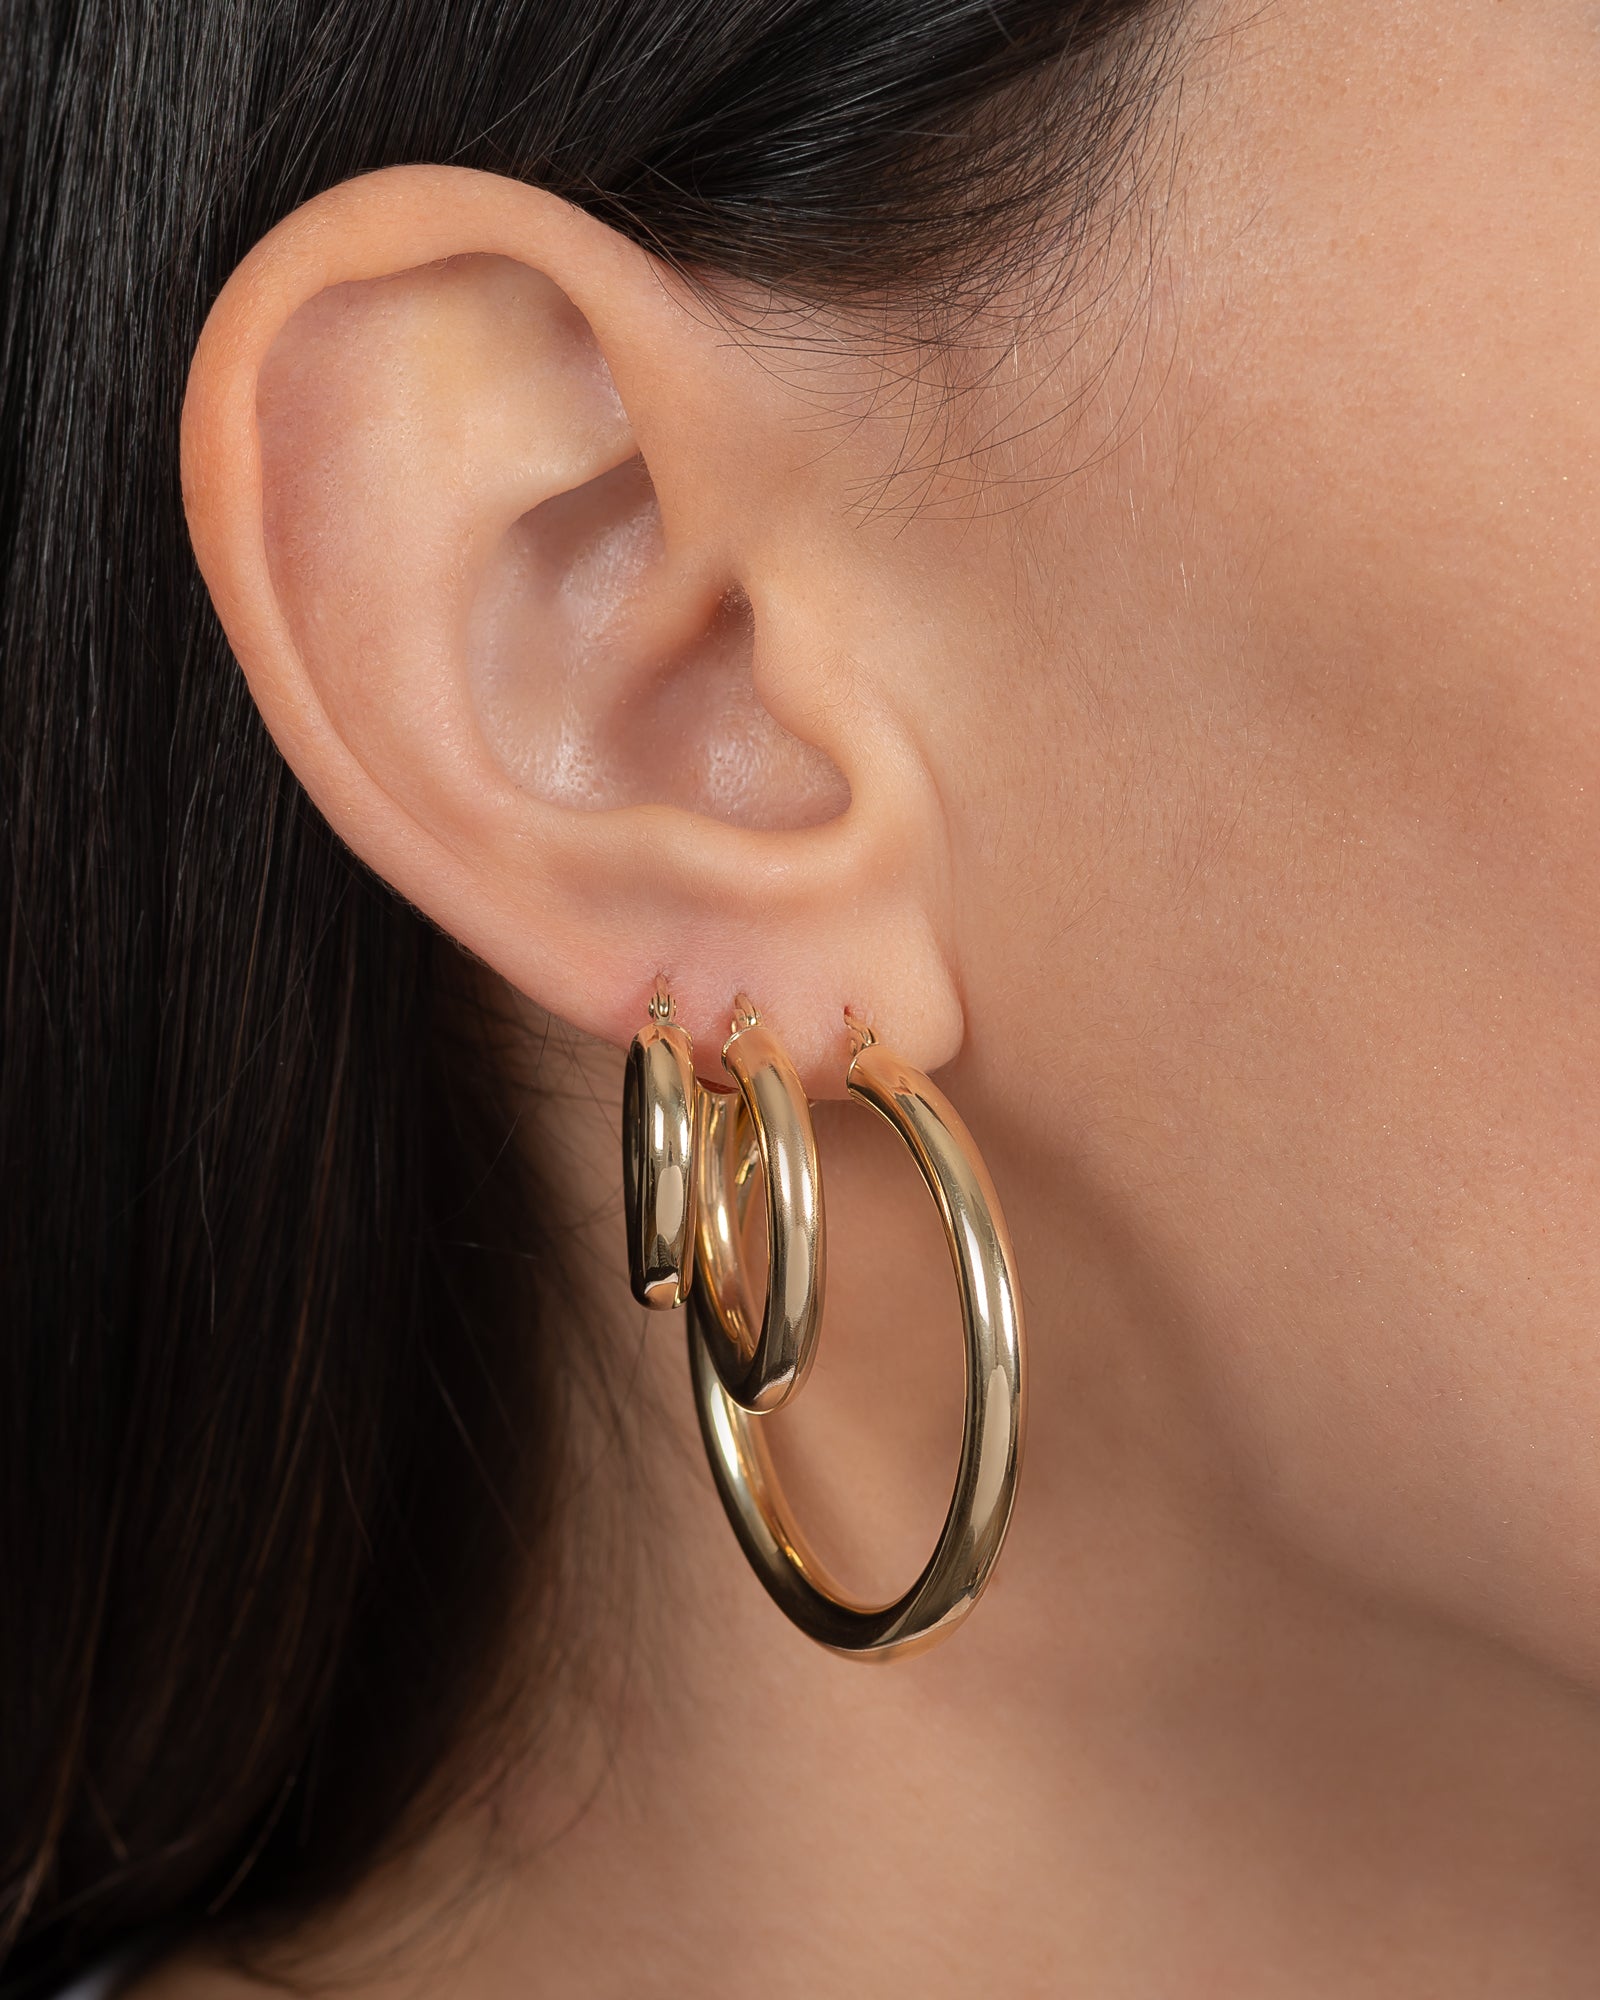 Daith Piercing Guide: Everything You Need to Know | Maison Miru